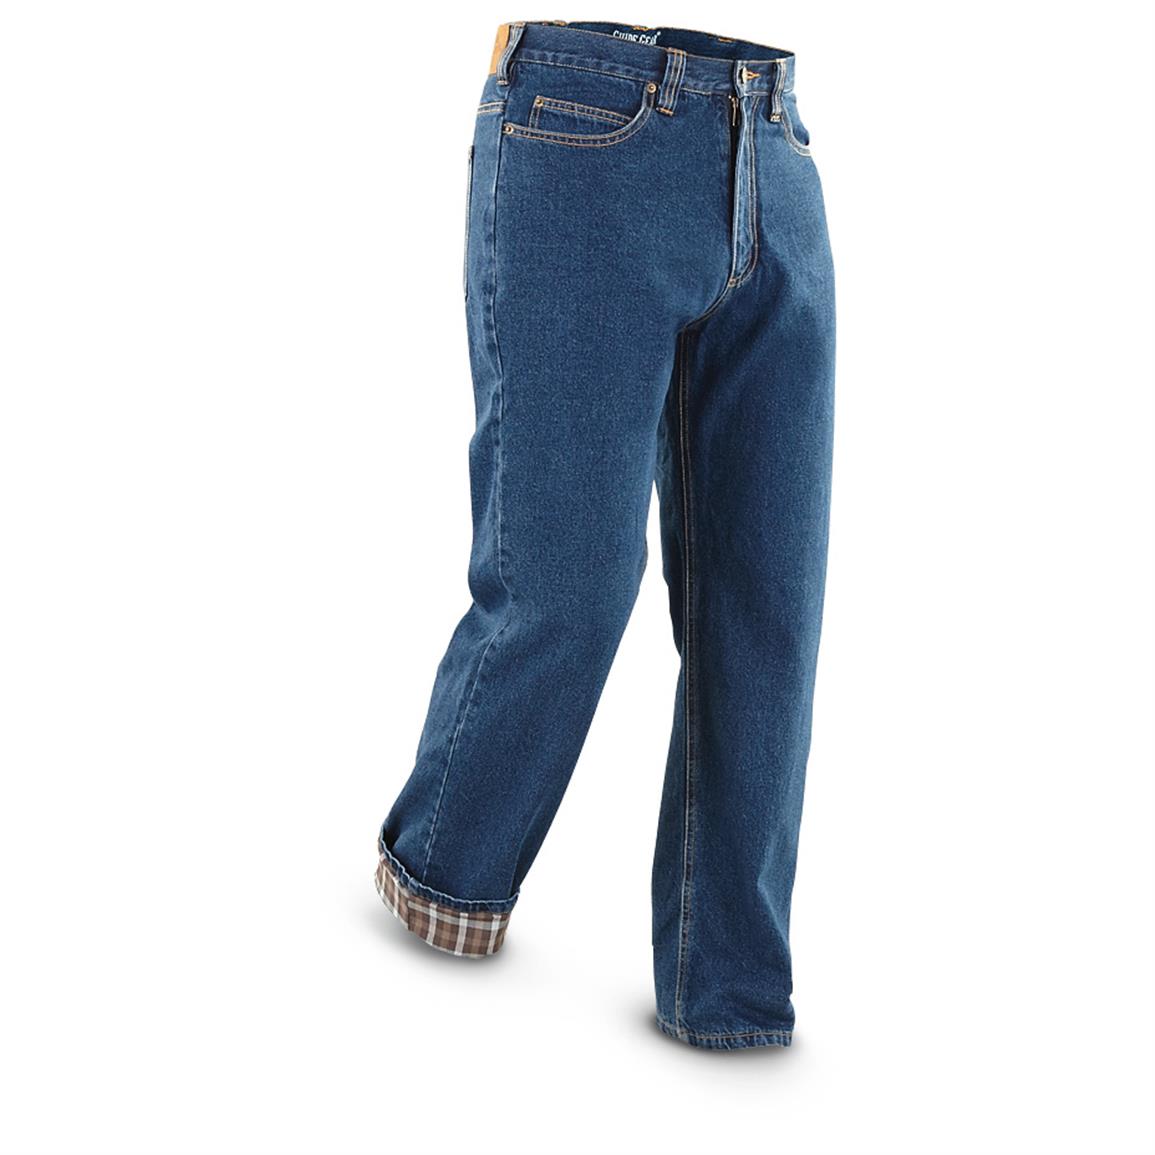 flannel lined blue jeans